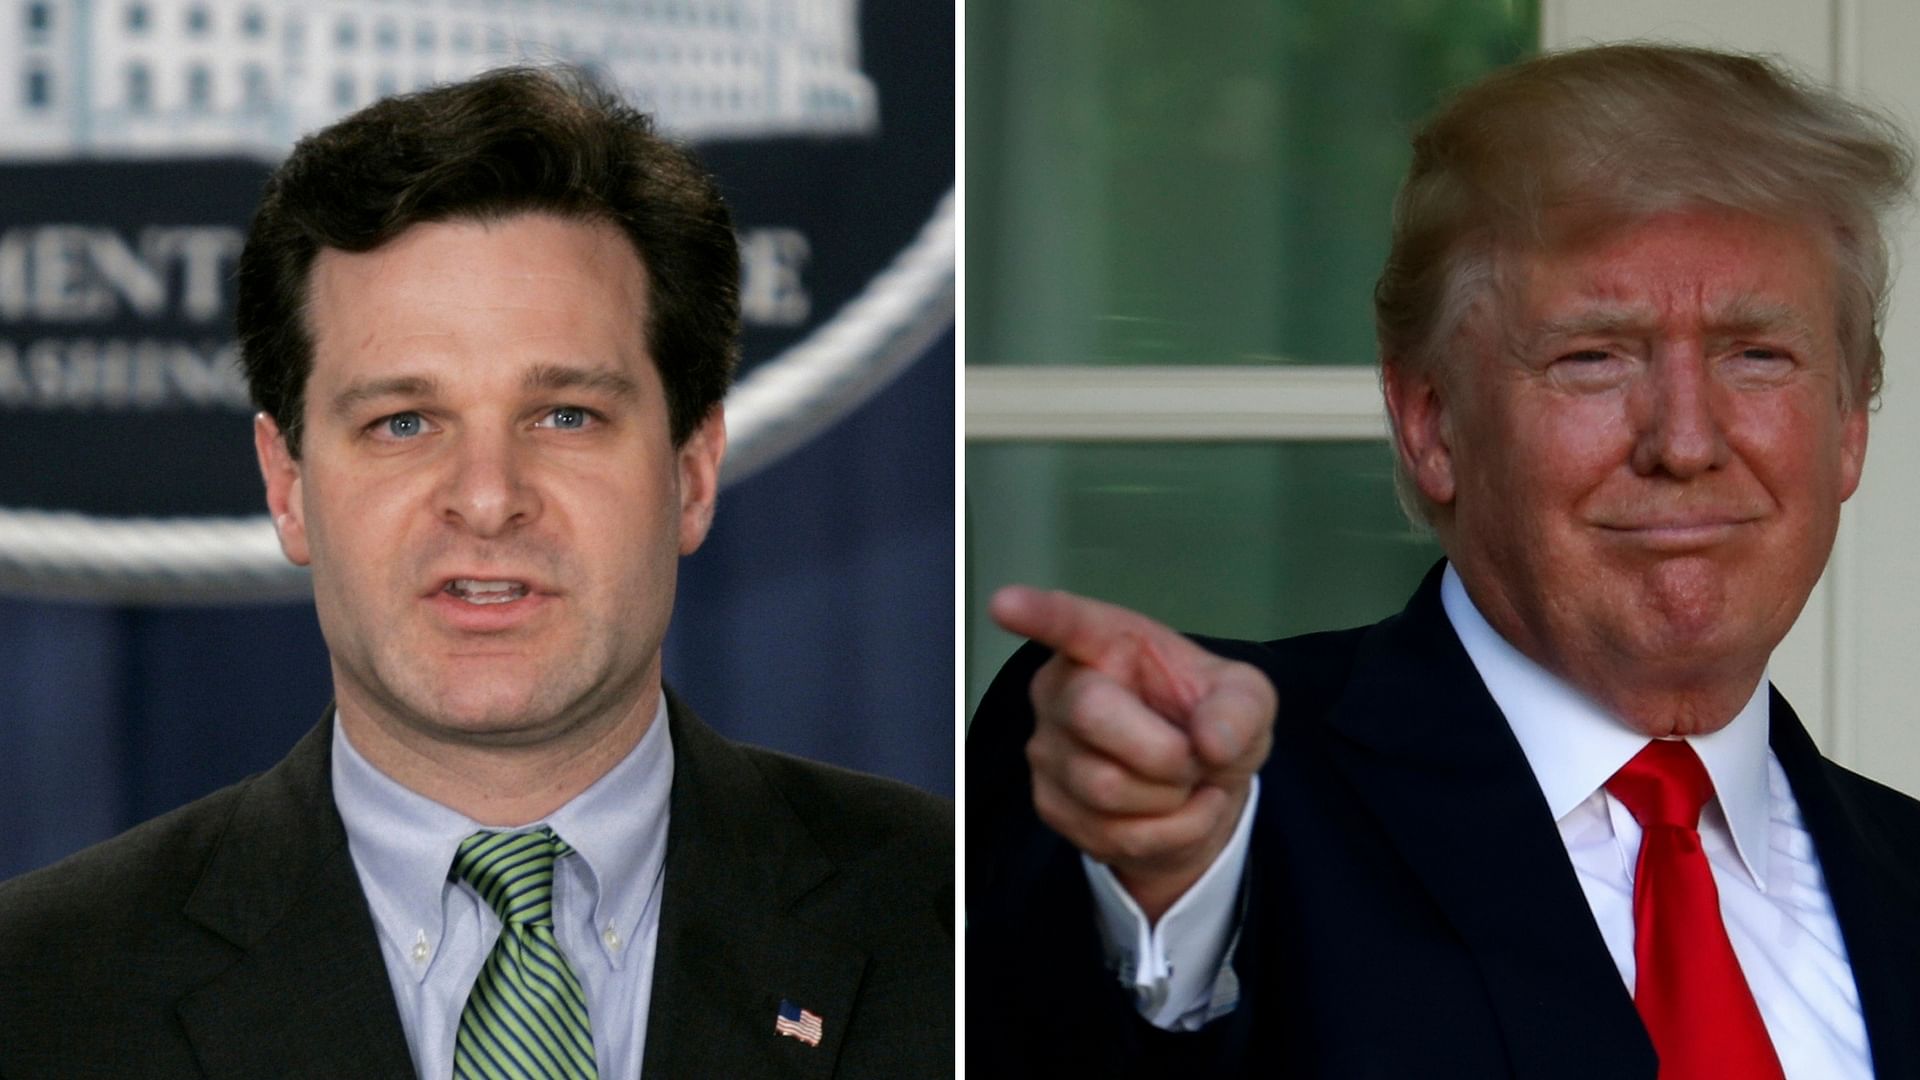 Christopher Wray emerged from a list of former prosecutors, politicians, and law enforcement officials interviewed by Trump for FBI chief.